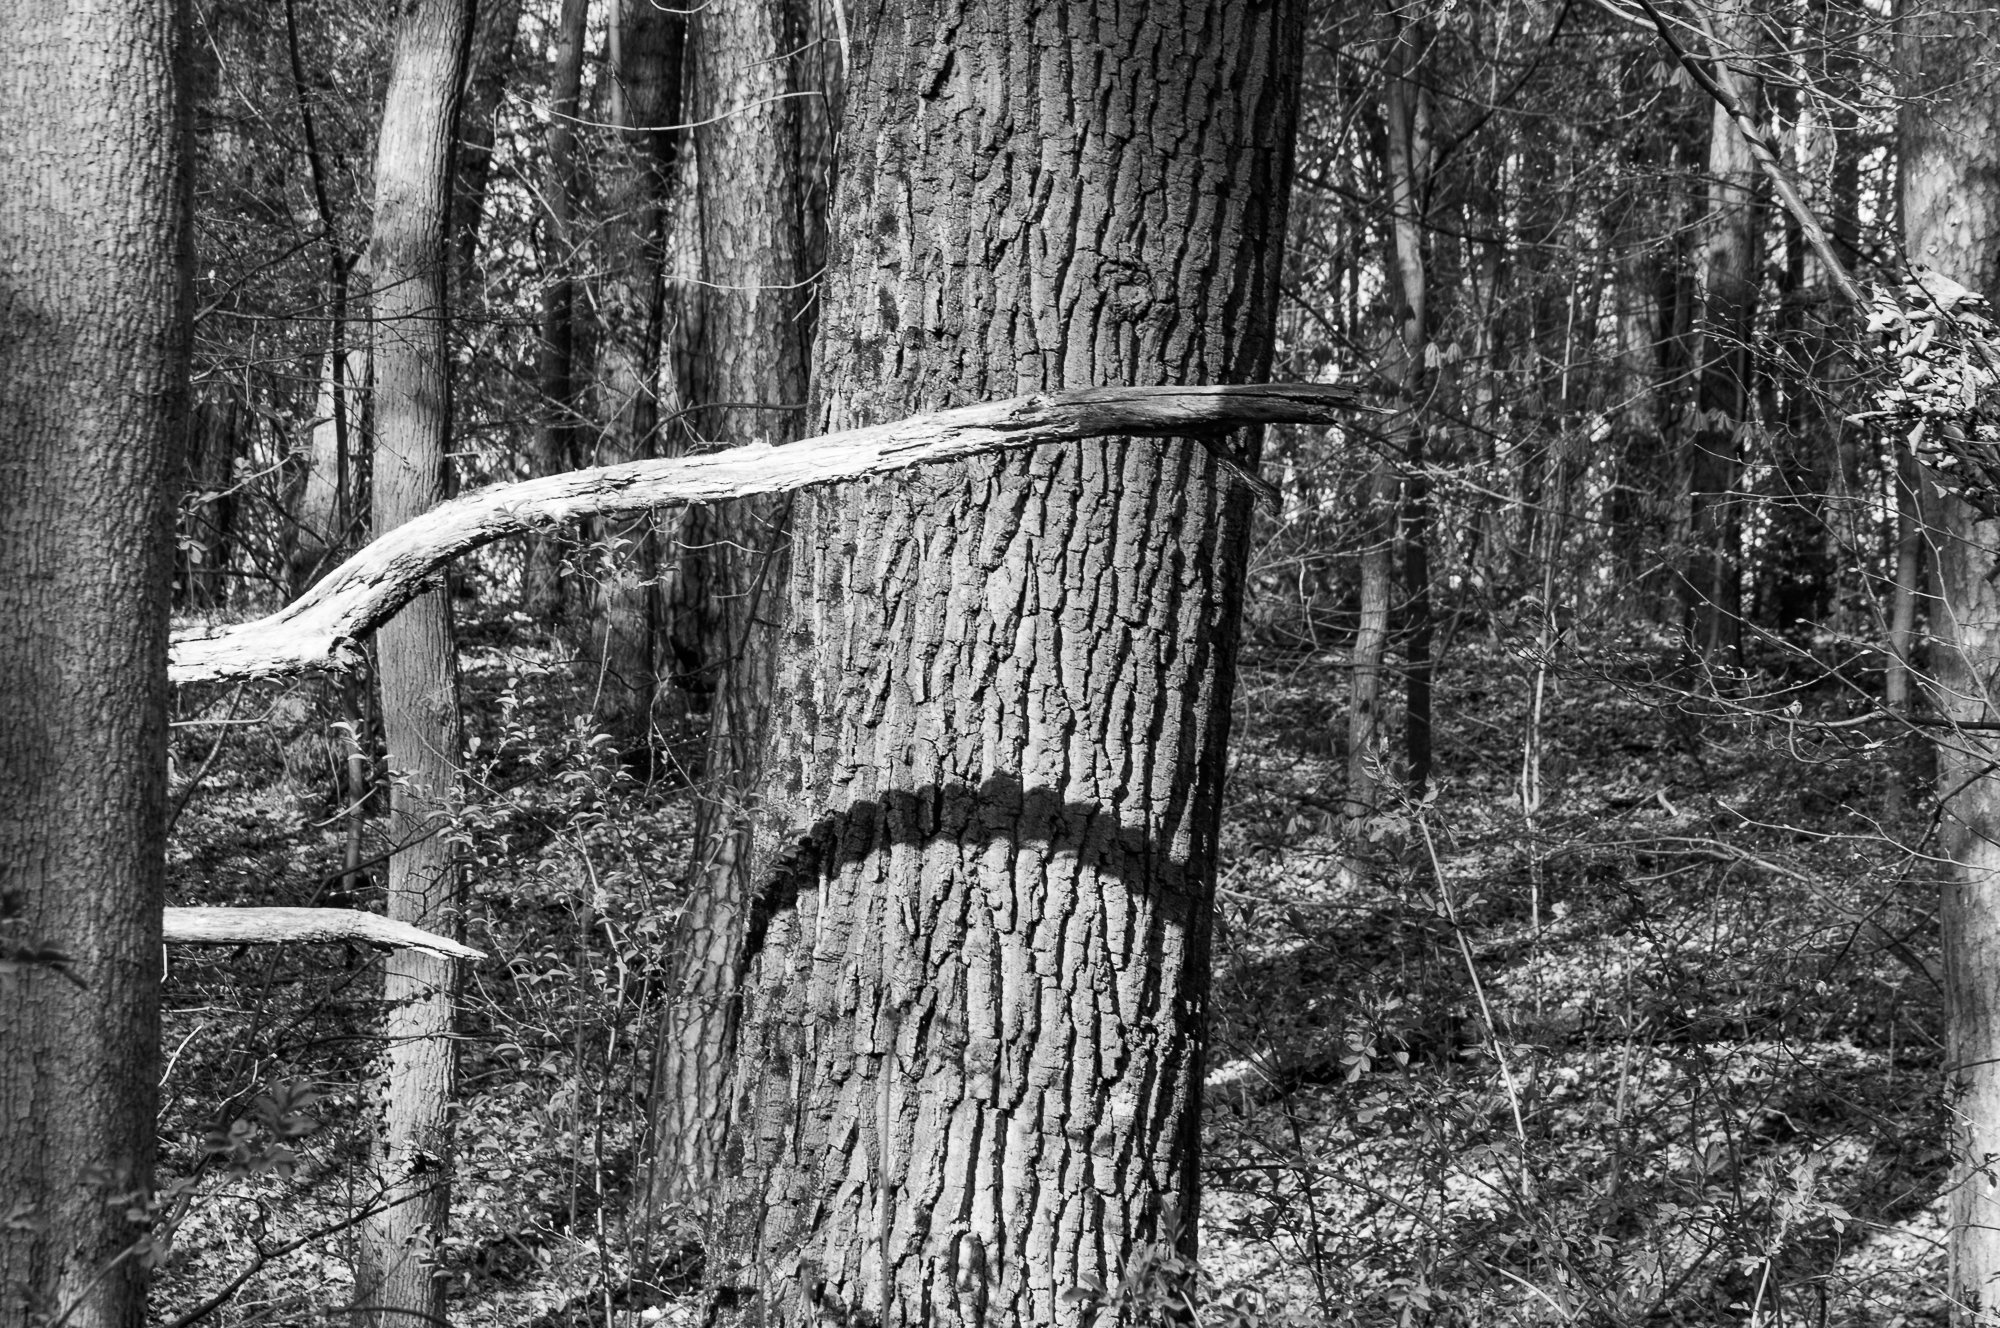 Adam Mazek Photography Warsaw (Warszawa) 2019. Post: "You will never find what you're looking for." Minimalism. Tree. Sadness.